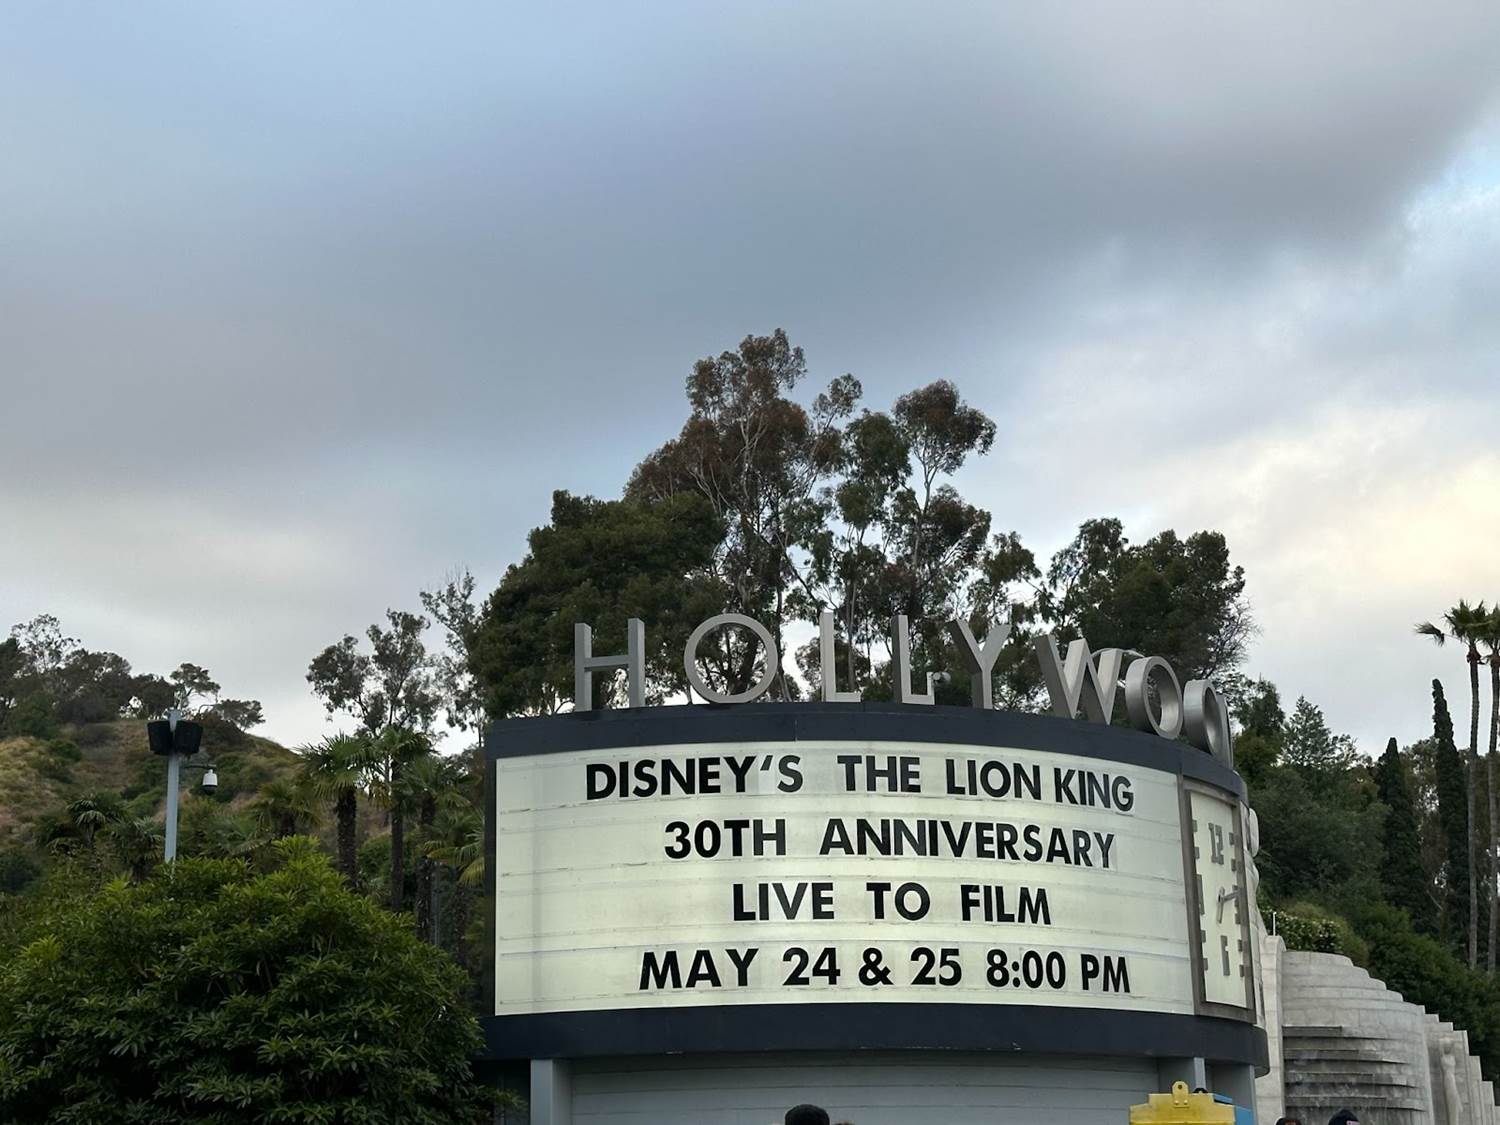 Photo Recap: Disney's 'The Lion King' 30th Anniversary Live-to-Film Concert at the Hollywood Bowl